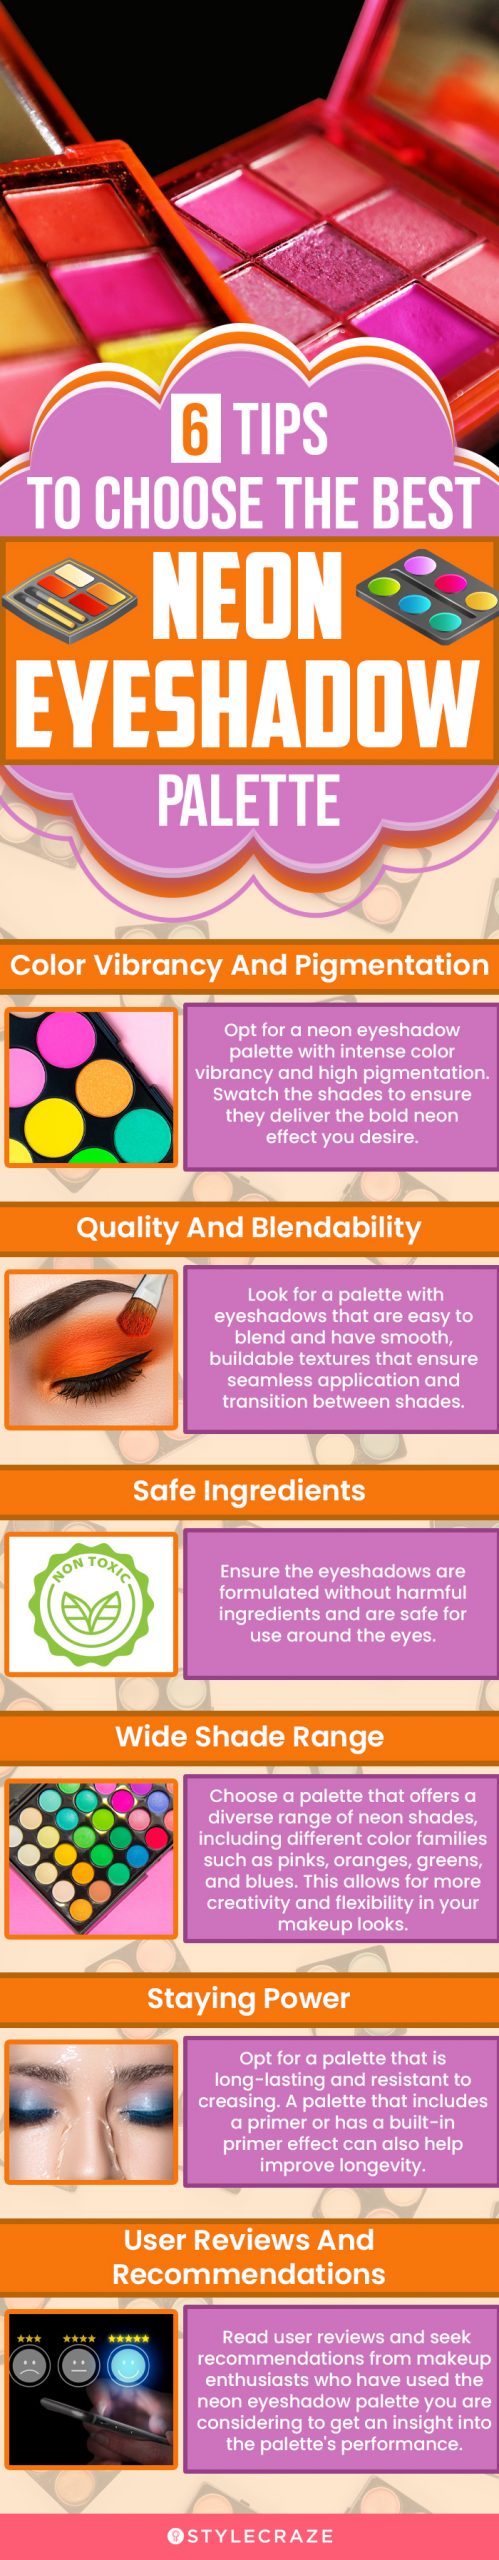 6 Tips To Choose The Best Neon Eyeshadow Palette (infographic)